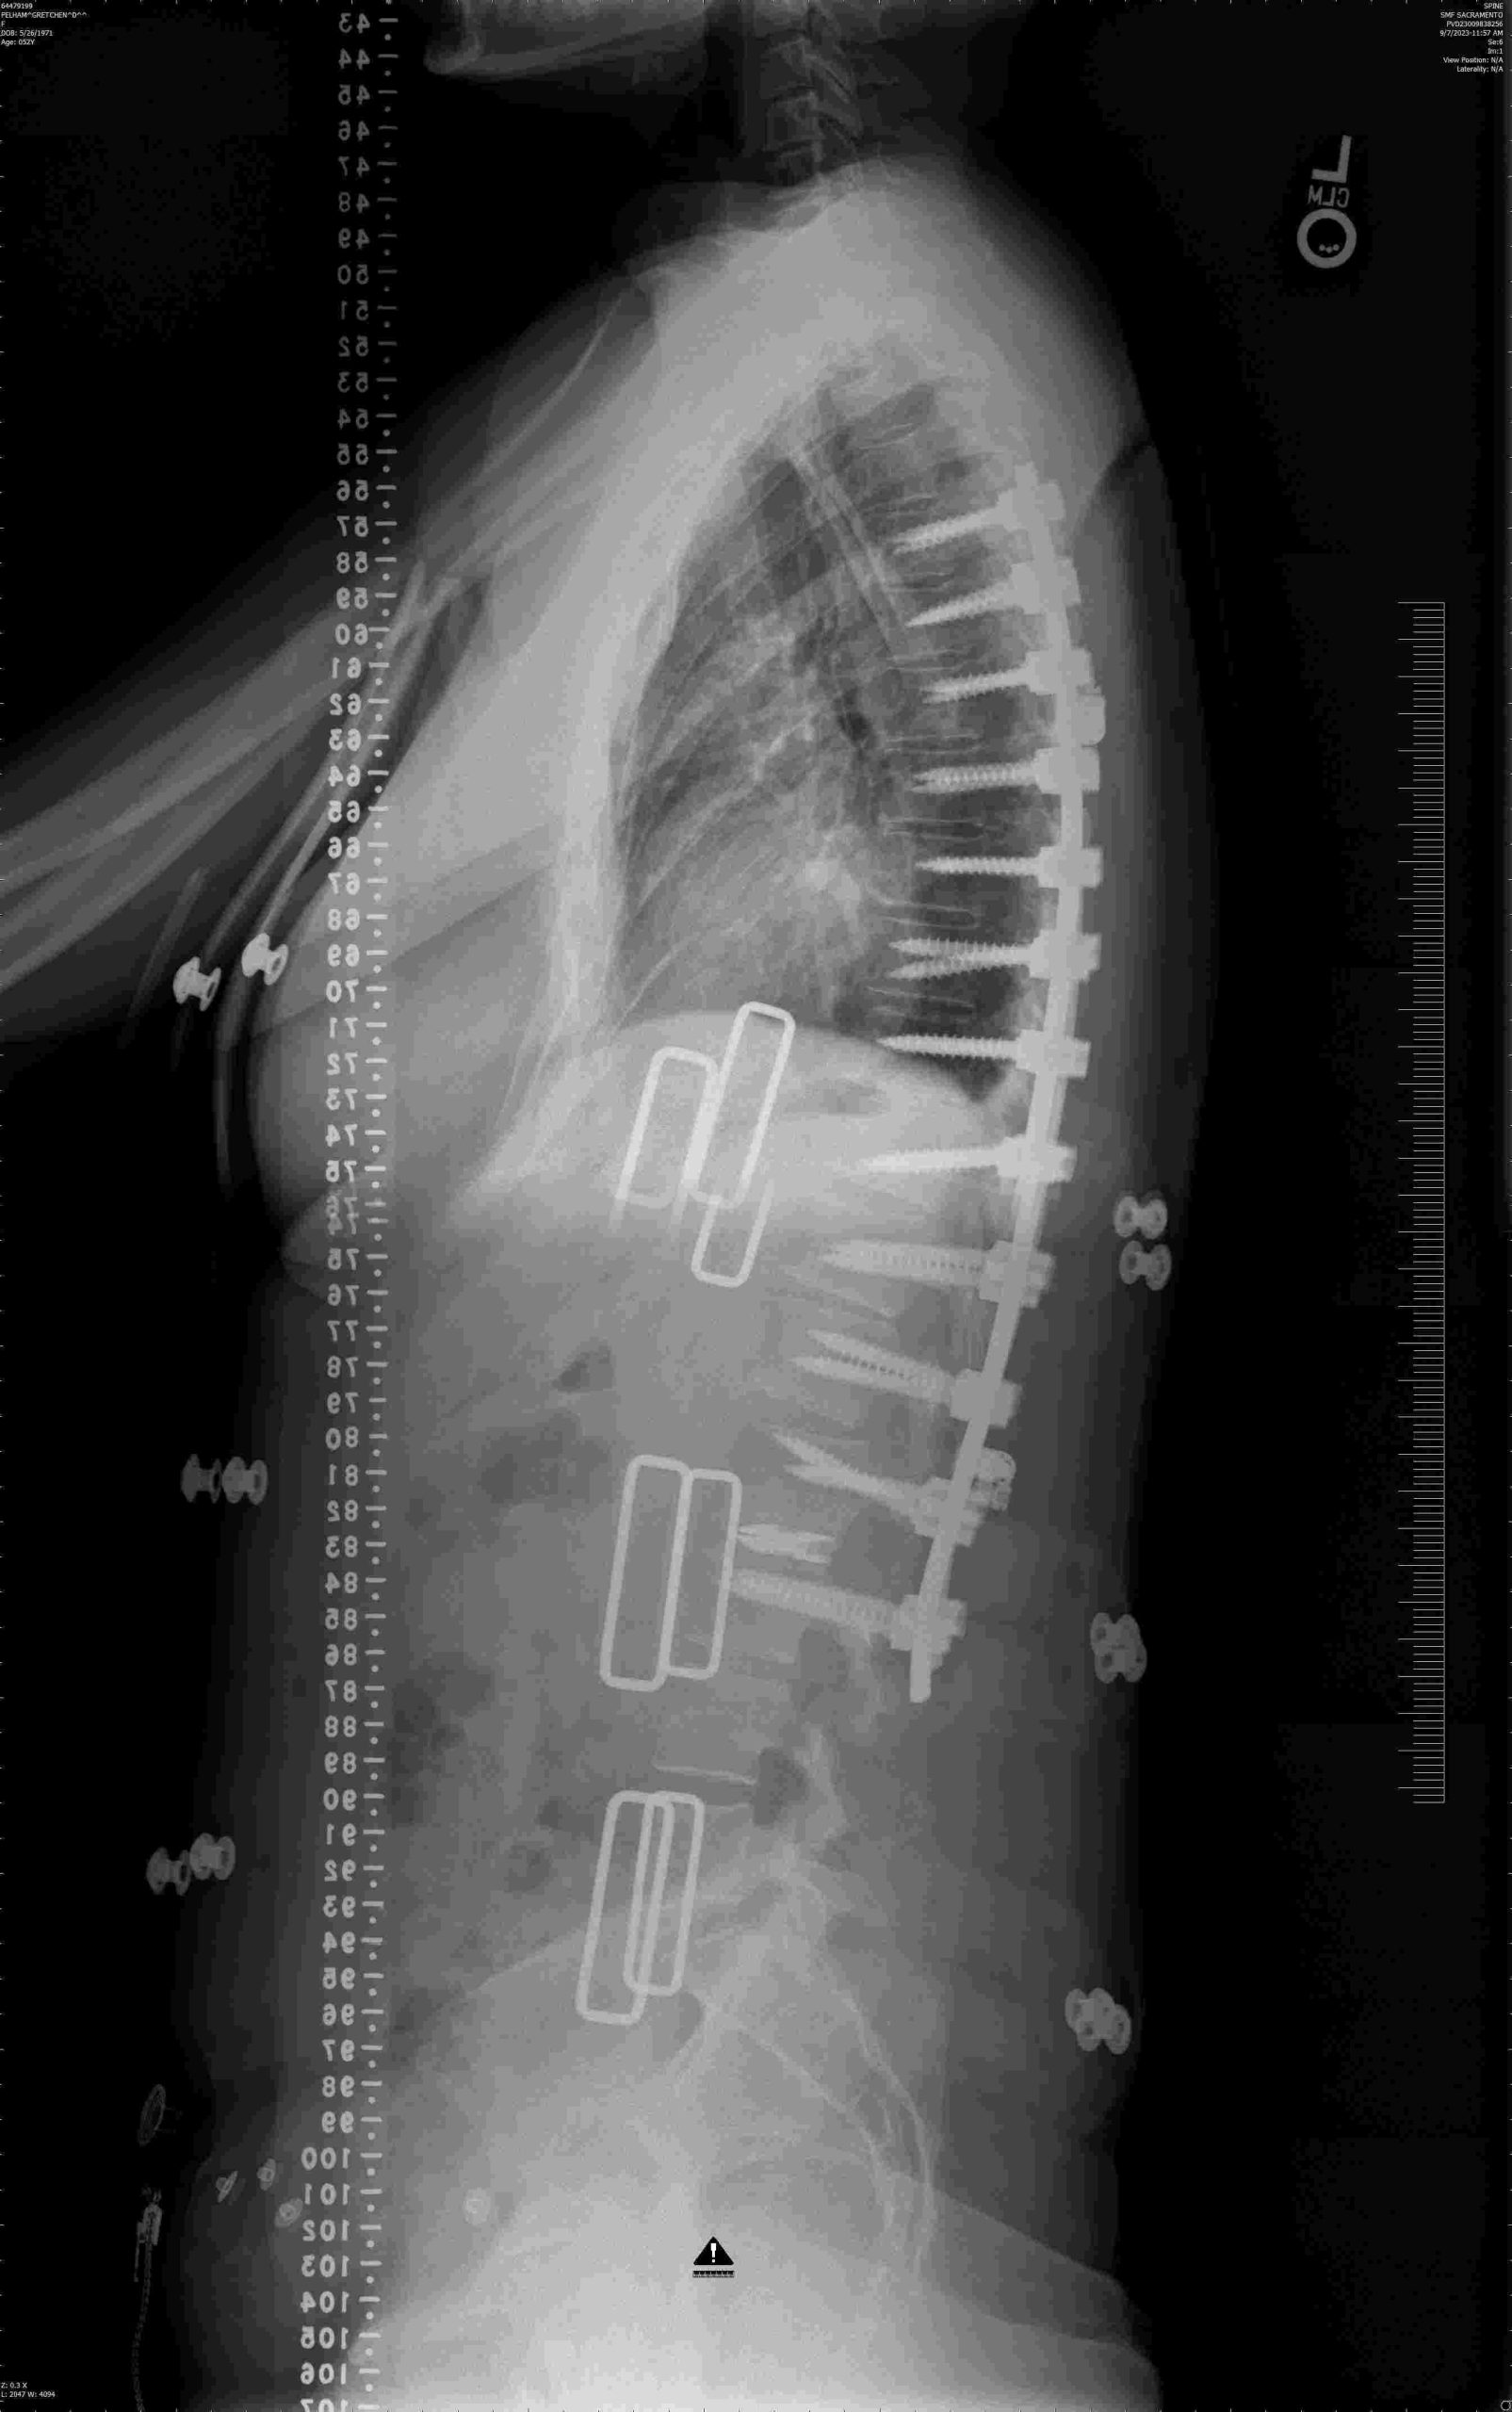 xray image of spine